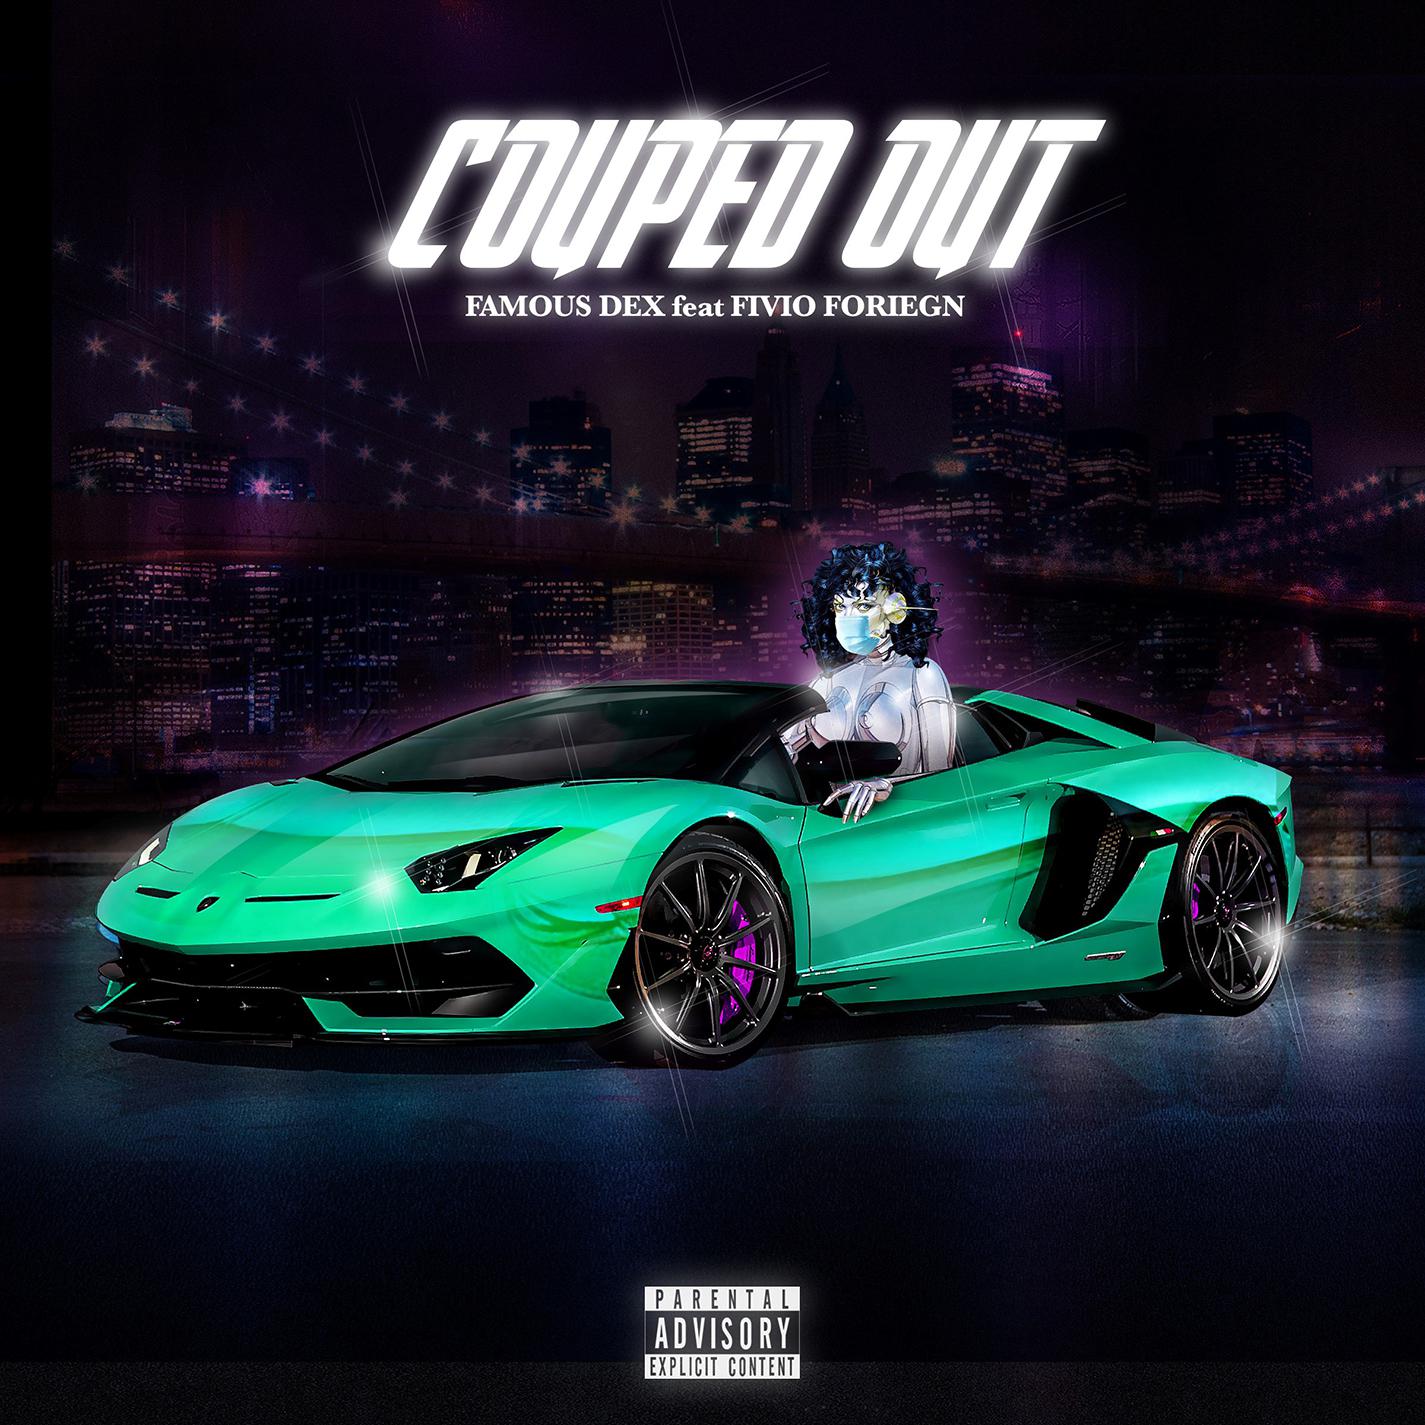 Couped Out (feat. Fivio Foreign)歌词 歌手Famous Dex / Fivio Foreign-专辑Couped Out (feat. Fivio Foreign)-单曲《Couped Out (feat. Fivio Foreign)》LRC歌词下载